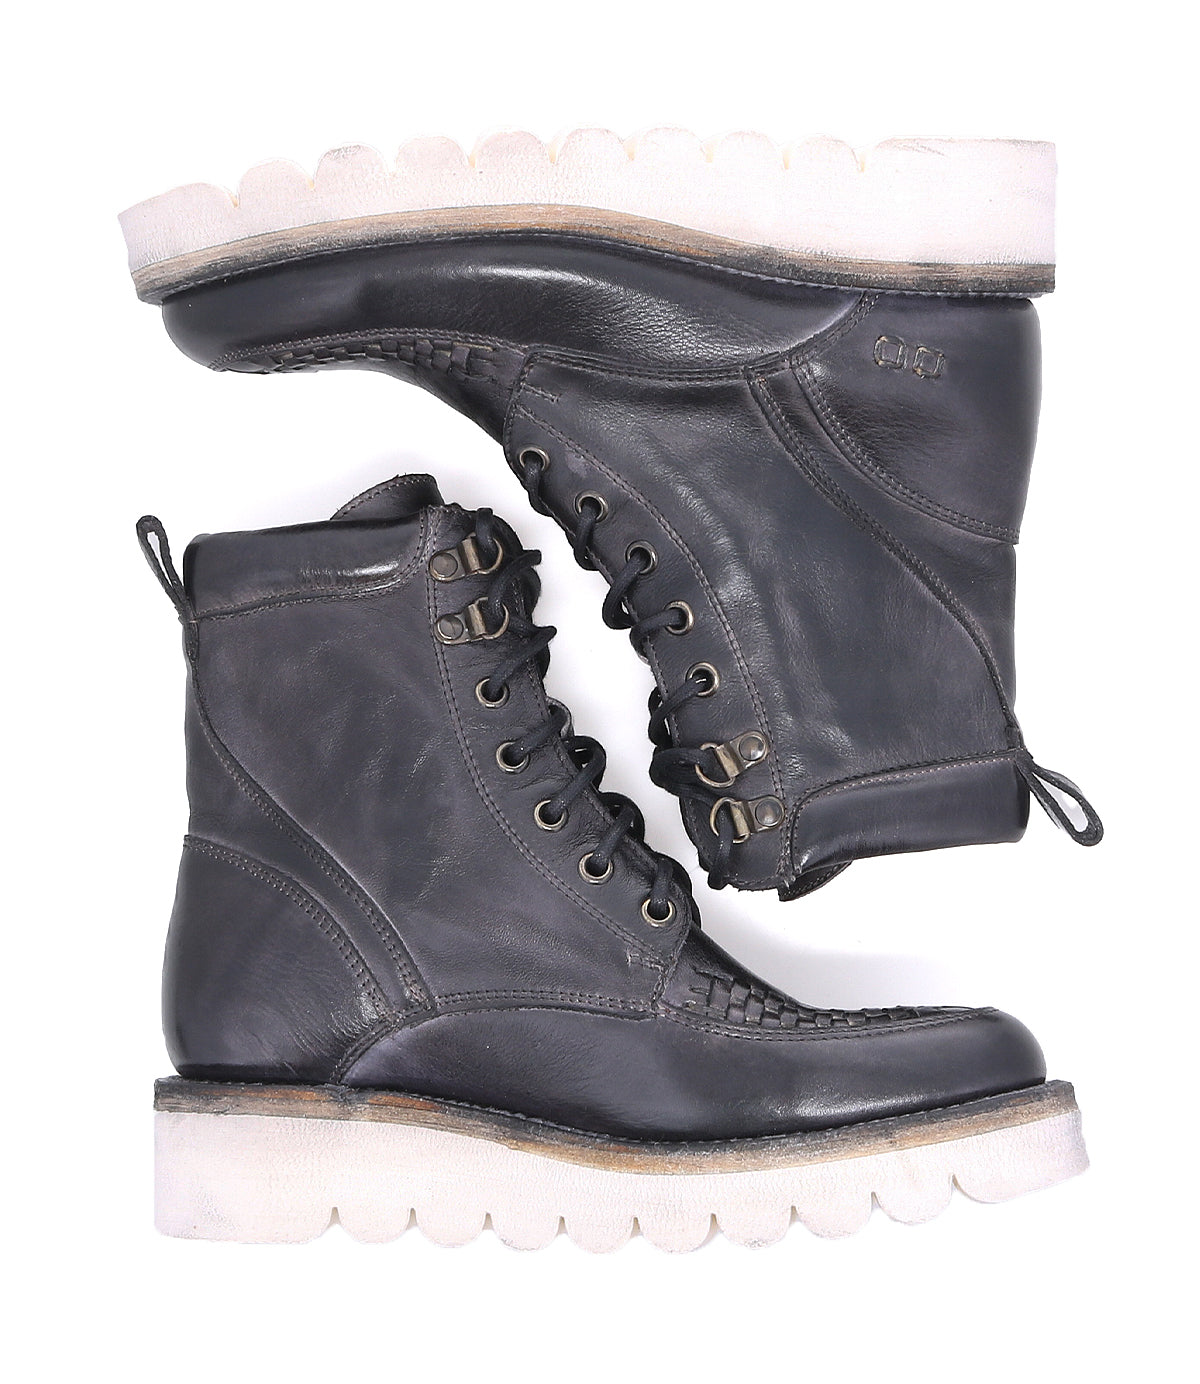 A pair of Bed Stu Elisha II black leather boots on a white background.